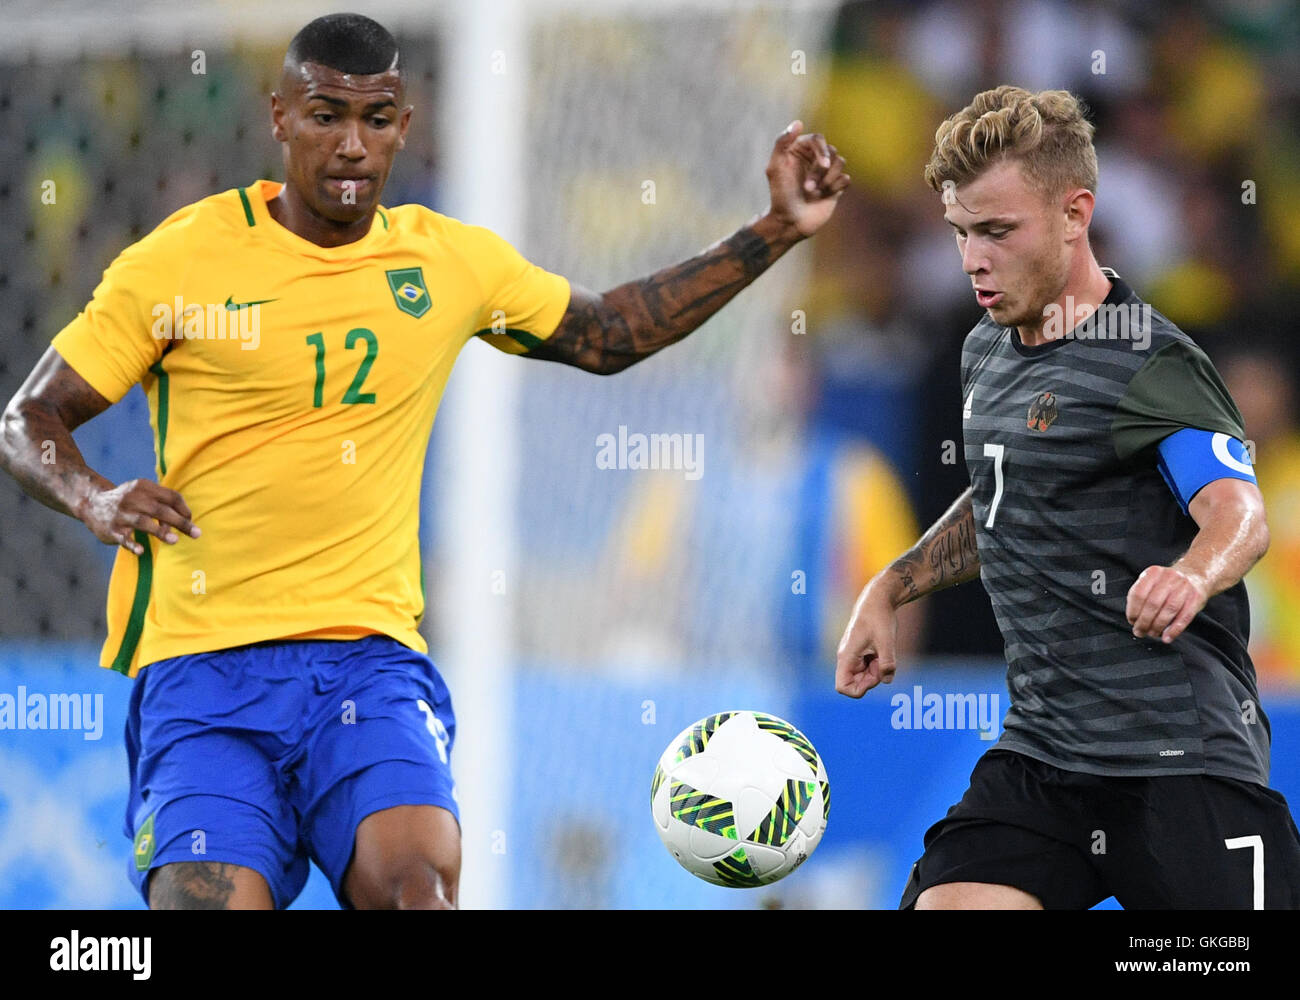 Rio de Janeiro, Brazil. 20th Aug, 2016. Maximilian Meyer (R) of Germany and Walace of Brazil vie for the ball during the Men's soccer Gold Medal Match between Brazil and Germany during the Rio 2016 Olympic Games at the Maracana in Rio de Janeiro, Brazil, 20 August 2016. Photo: Soeren Stache/dpa/Alamy Live News Stock Photo